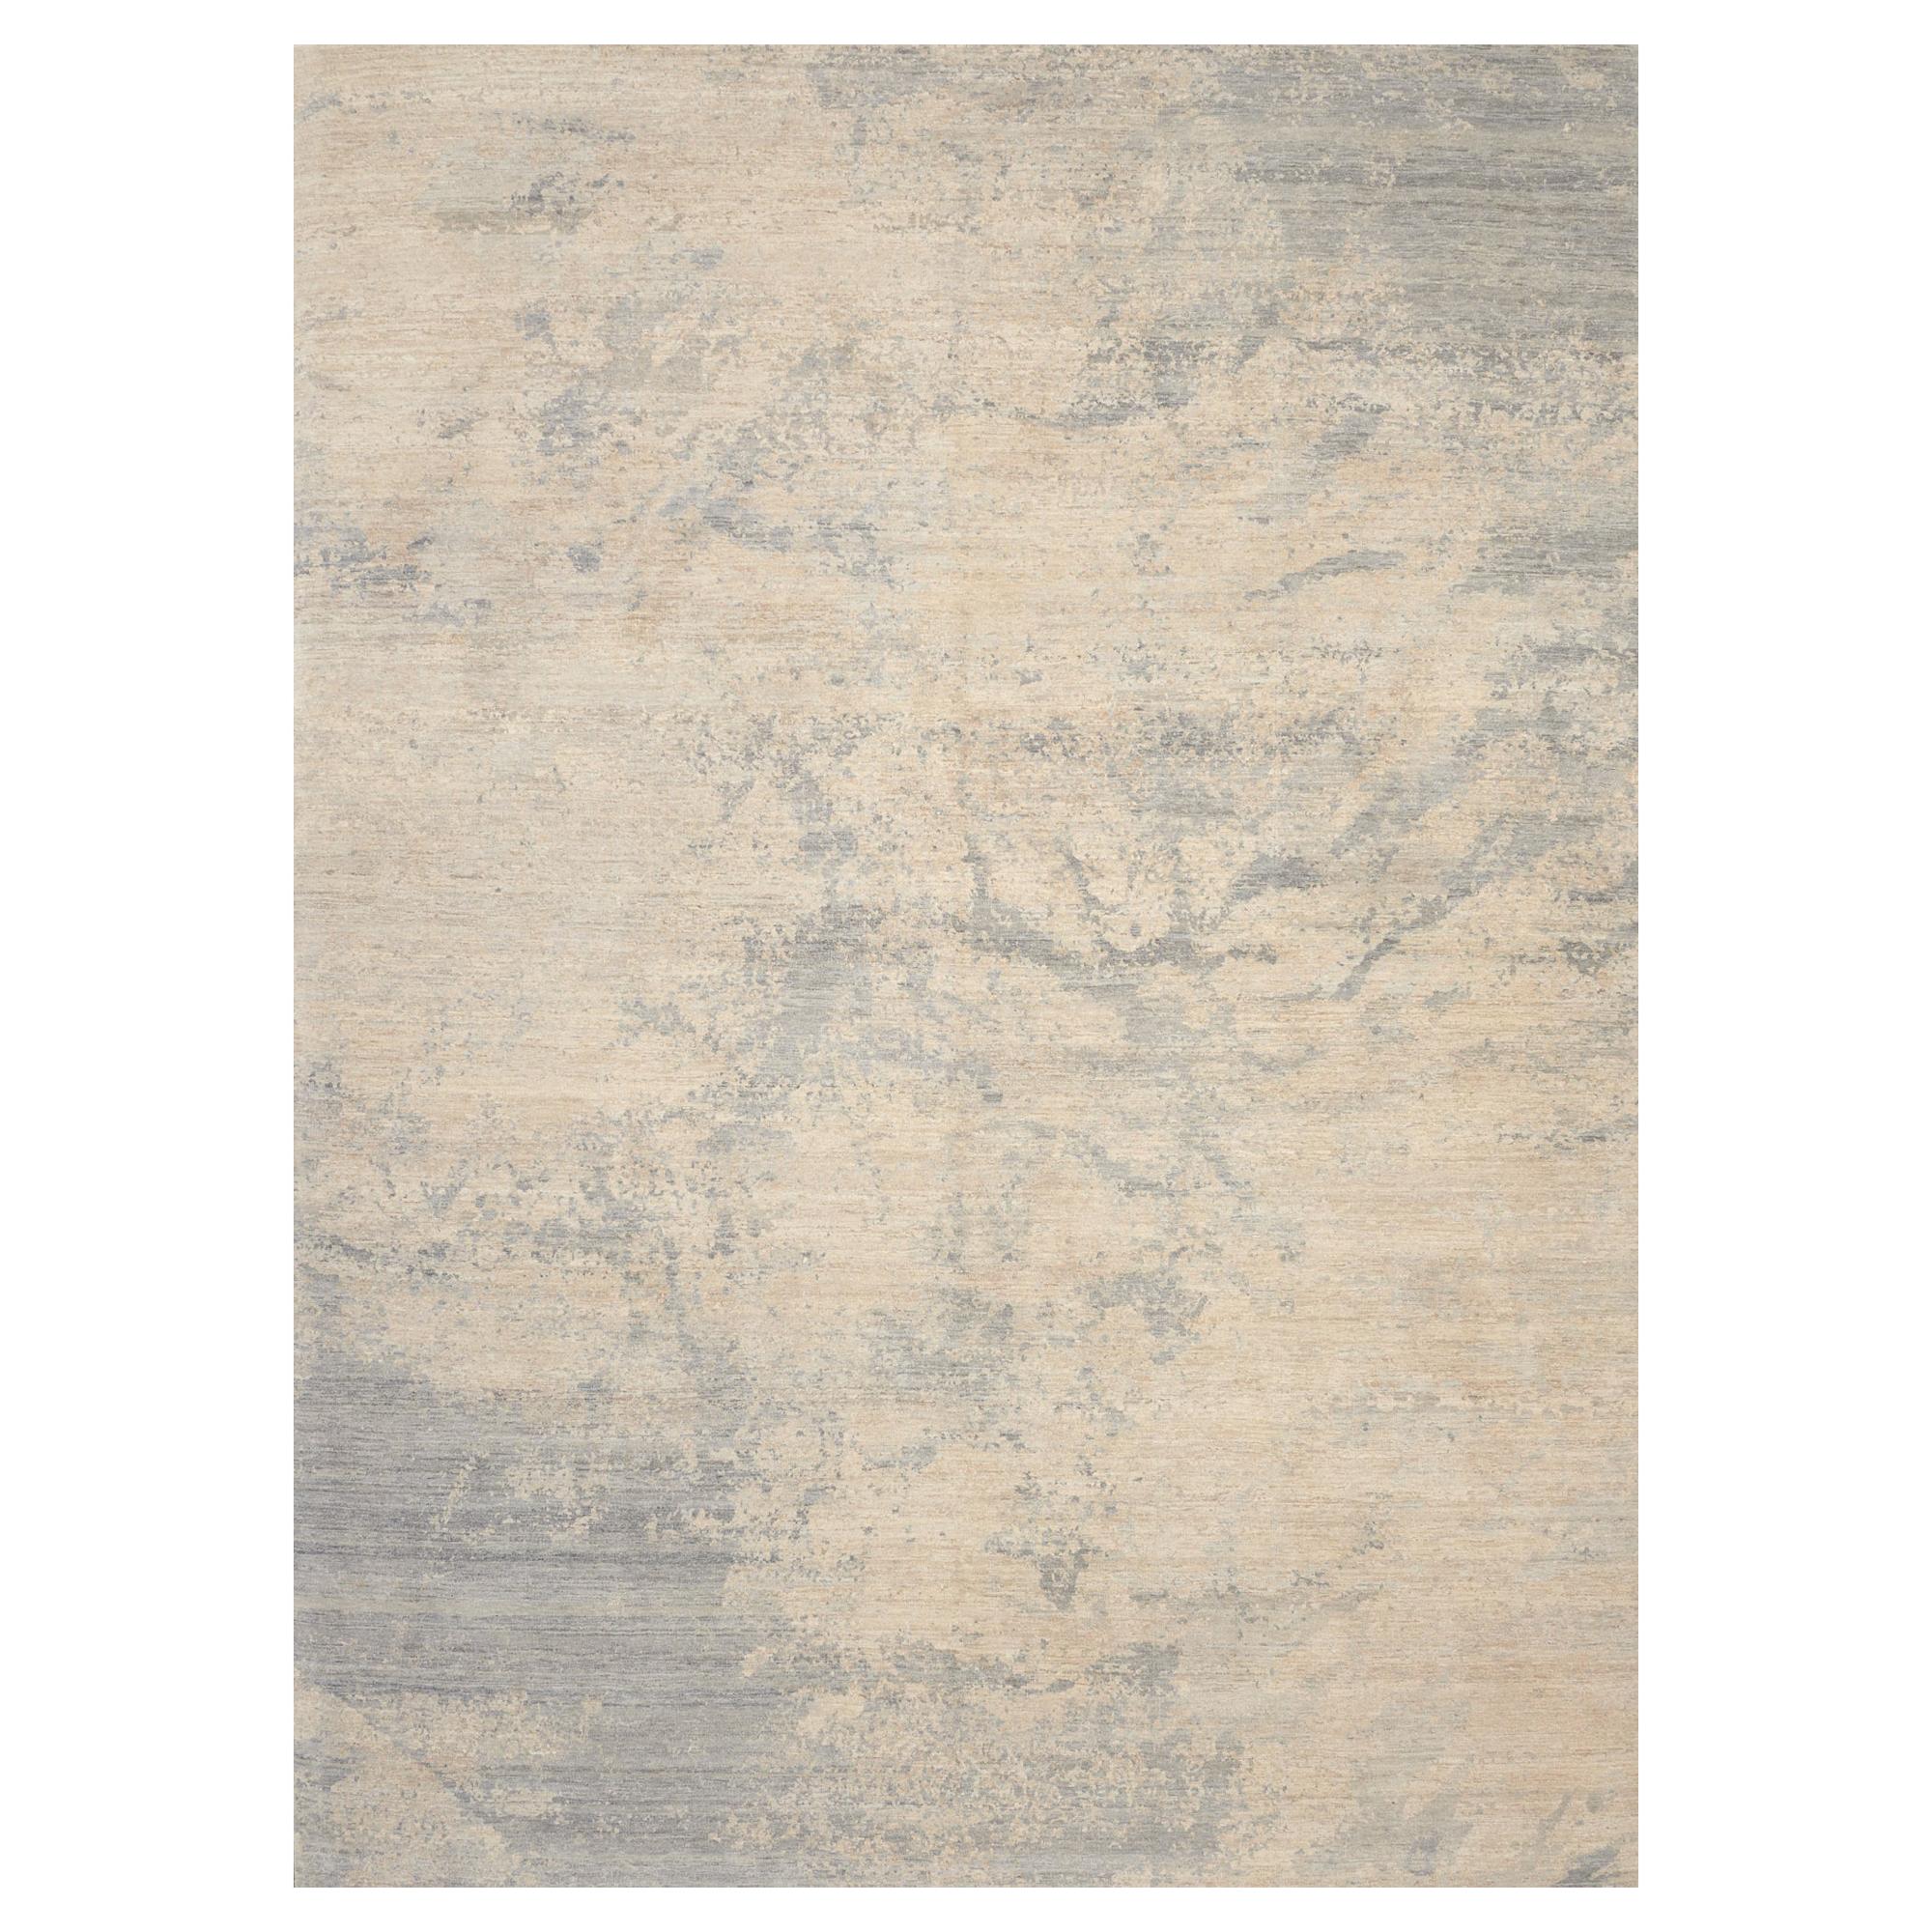 Schumacher Bologna Area Rug in Hand Knotted Wool, Patterson Flynn Martin